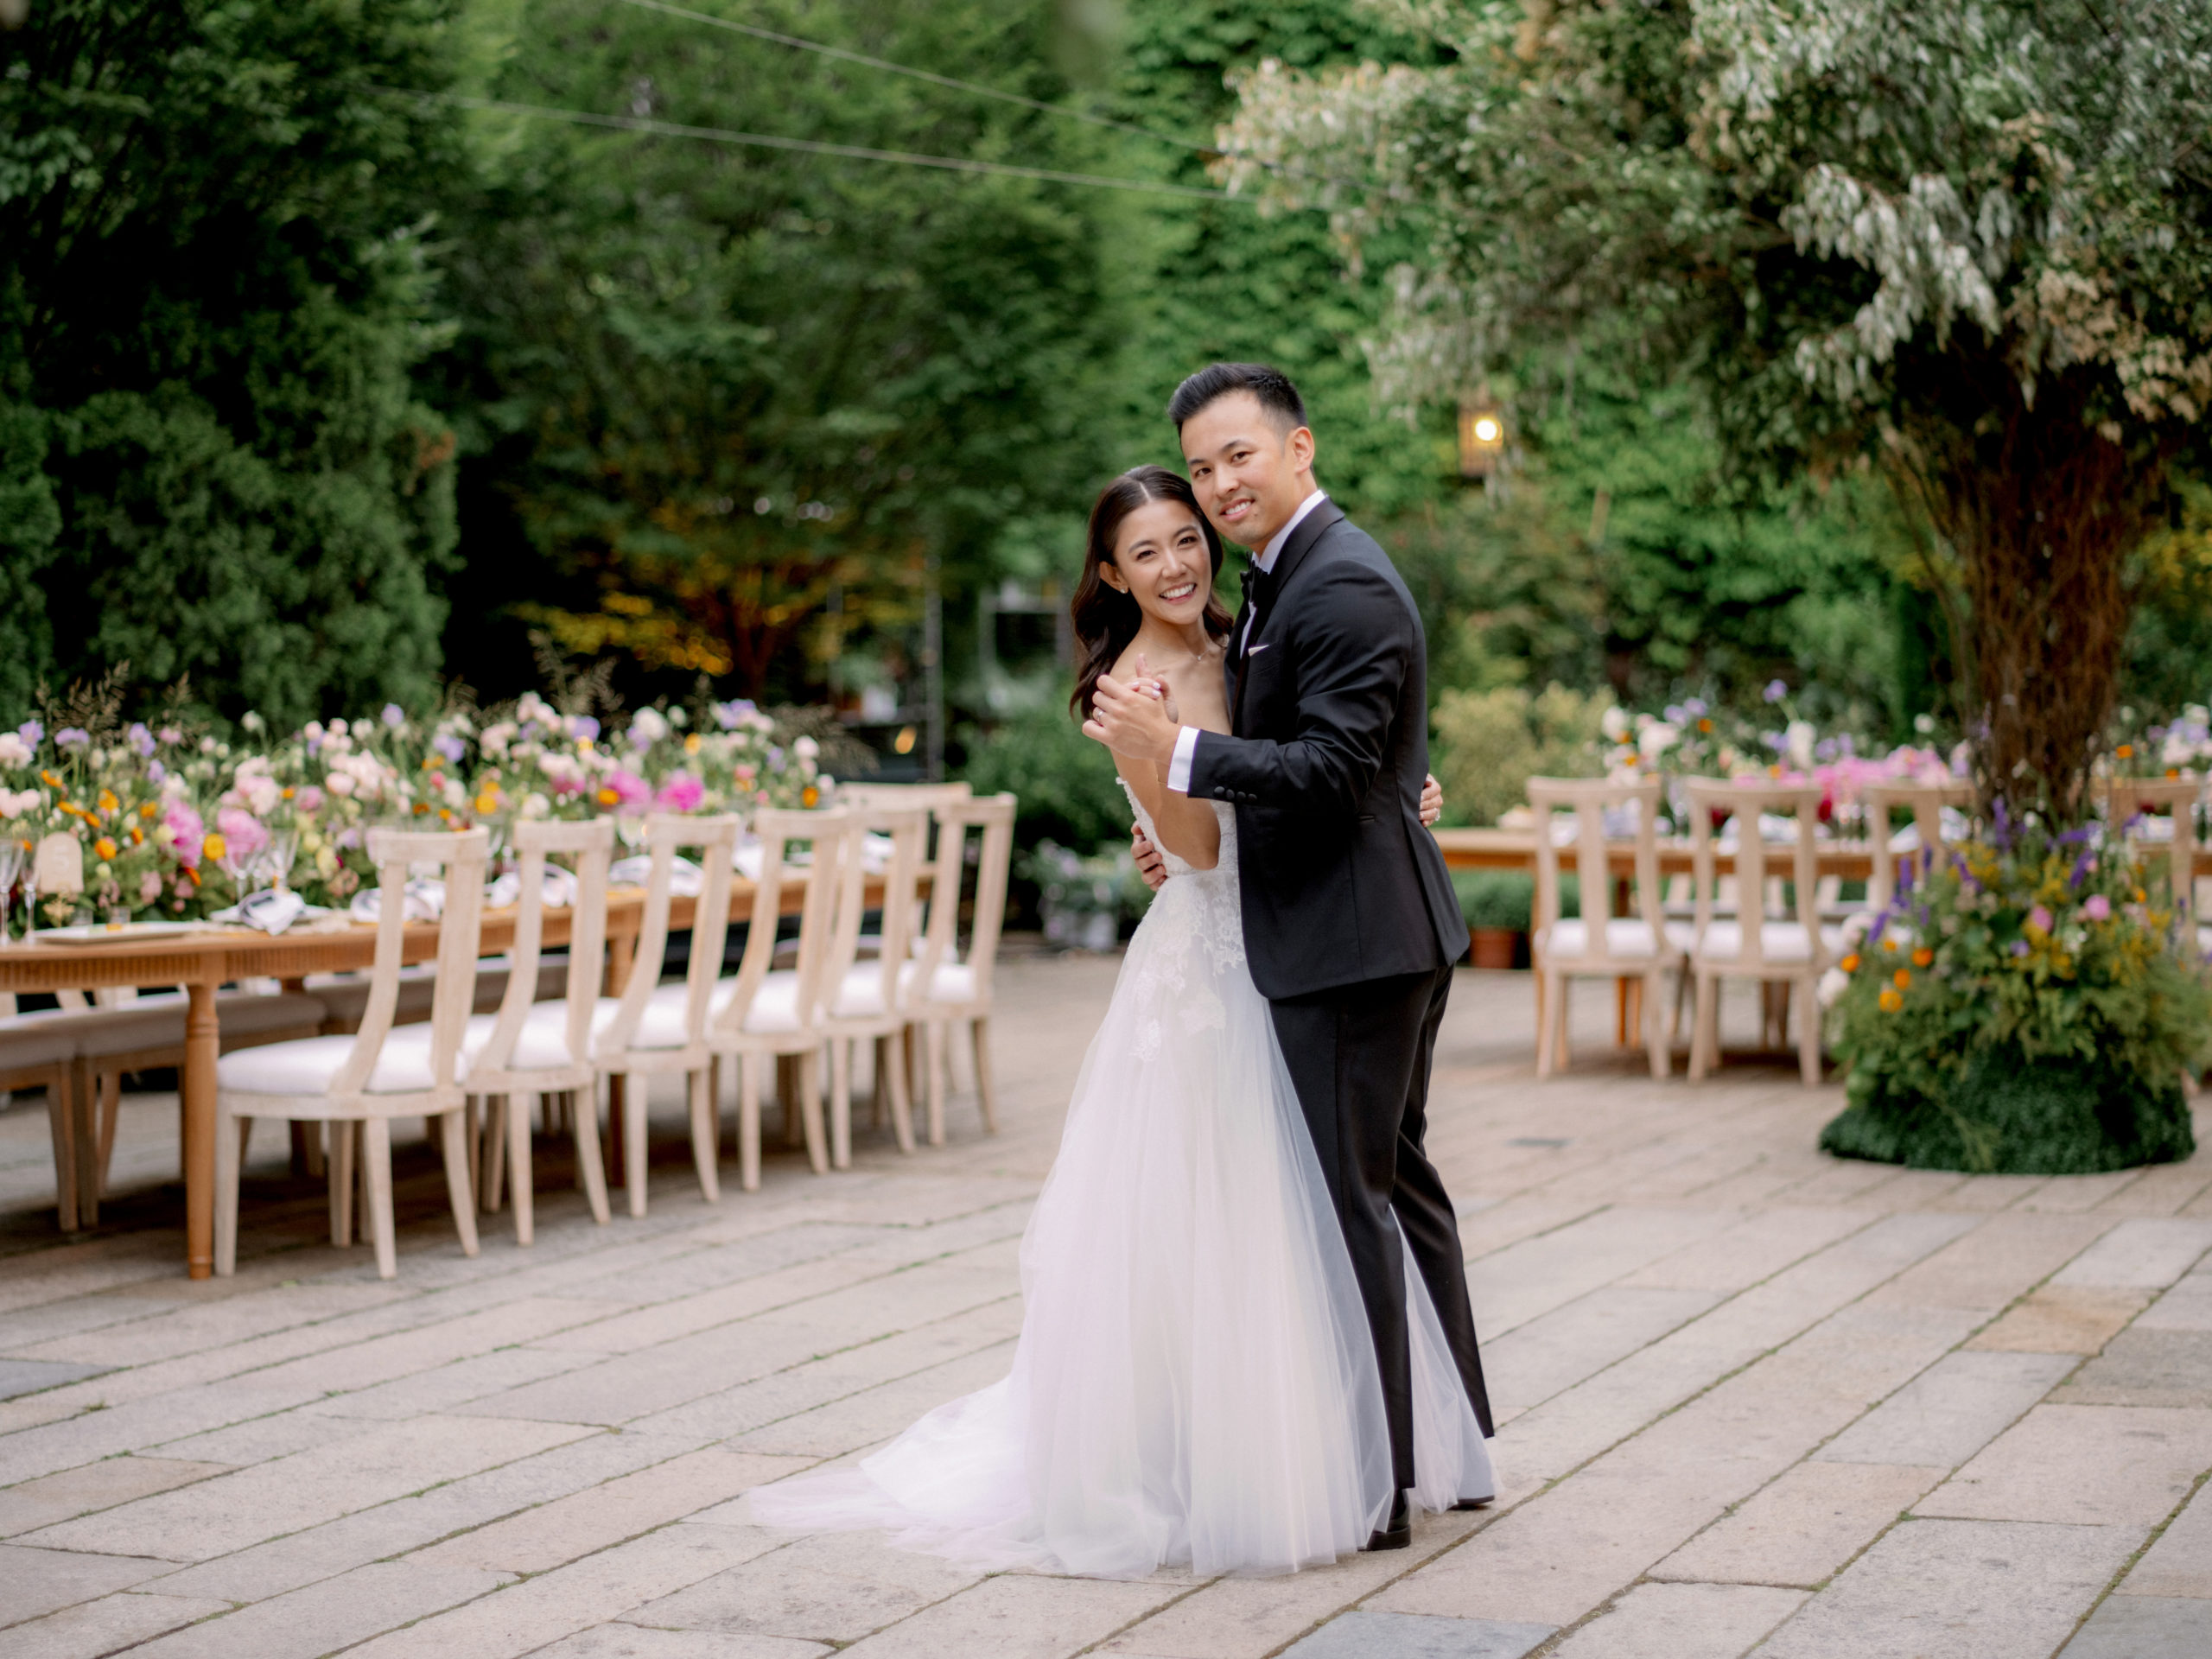 The bride and groom's first dance. Film vs. digital wedding photography image by Jenny Fu Studio